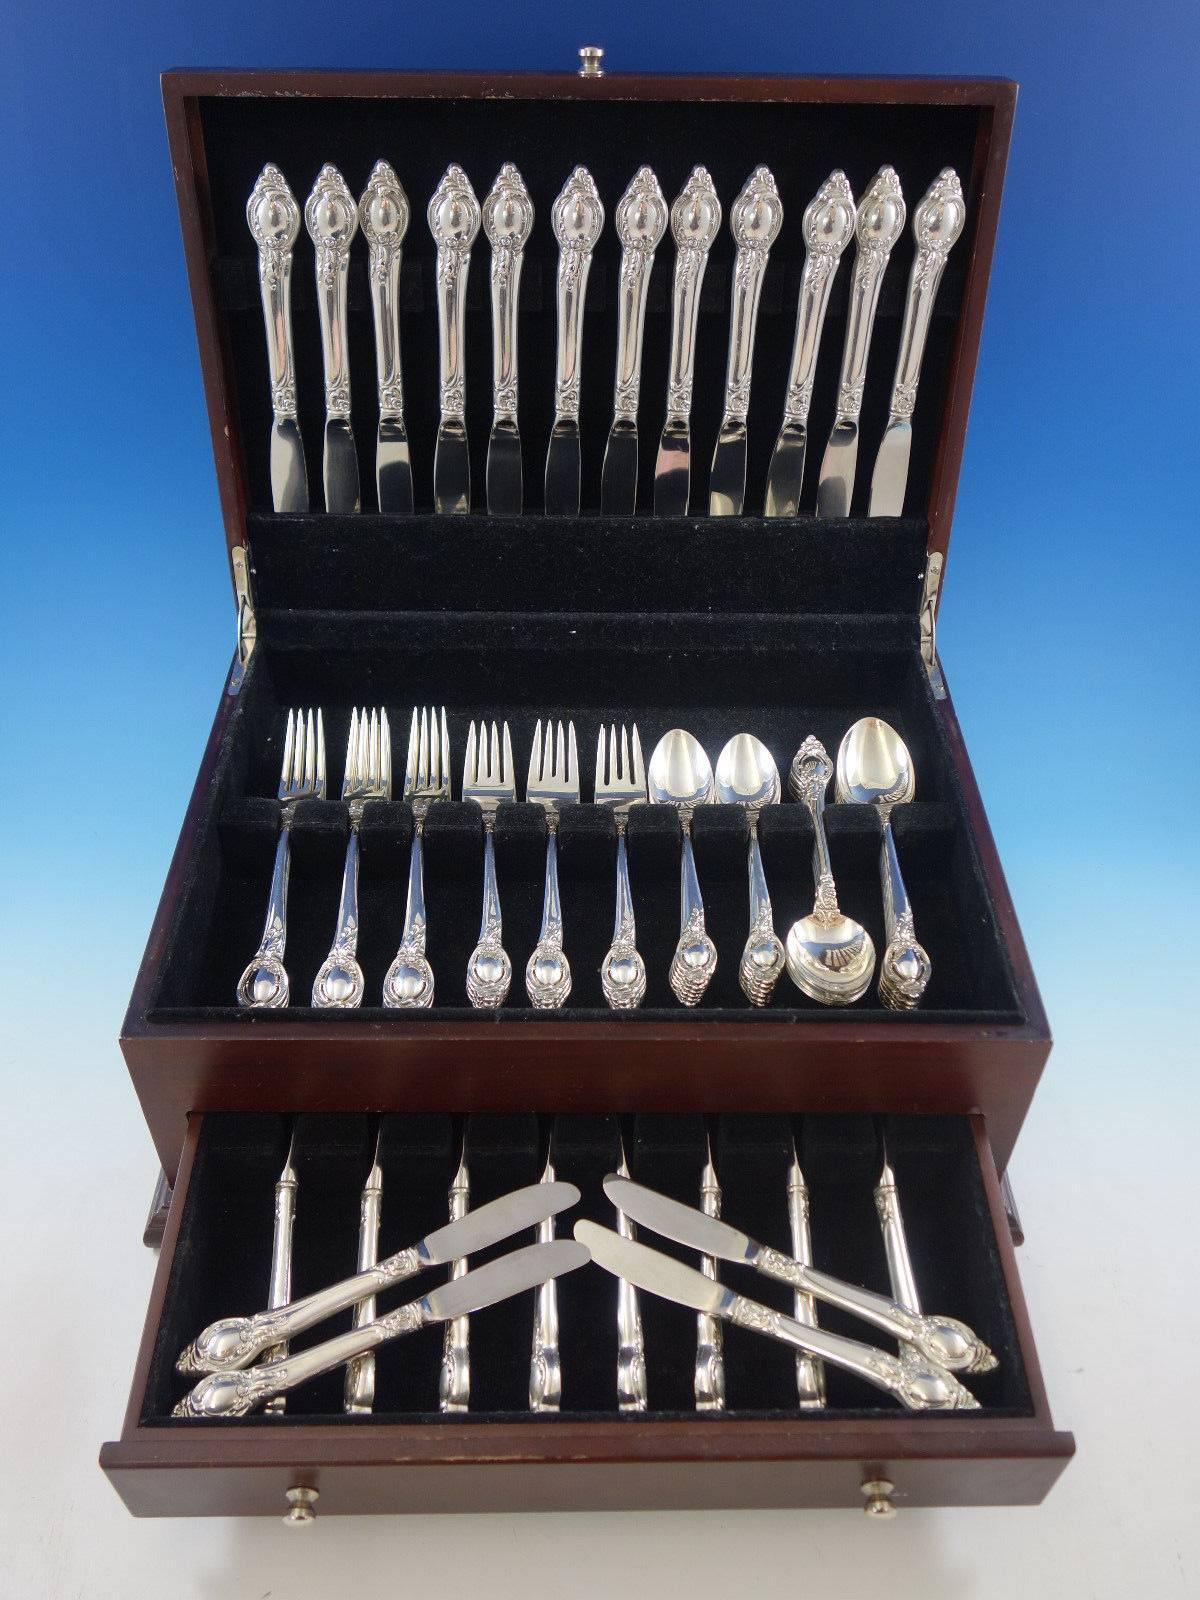 Cameo by Reed and Barton sterling silver flatware set, 72 pieces. This set includes: 

12 knives, 9